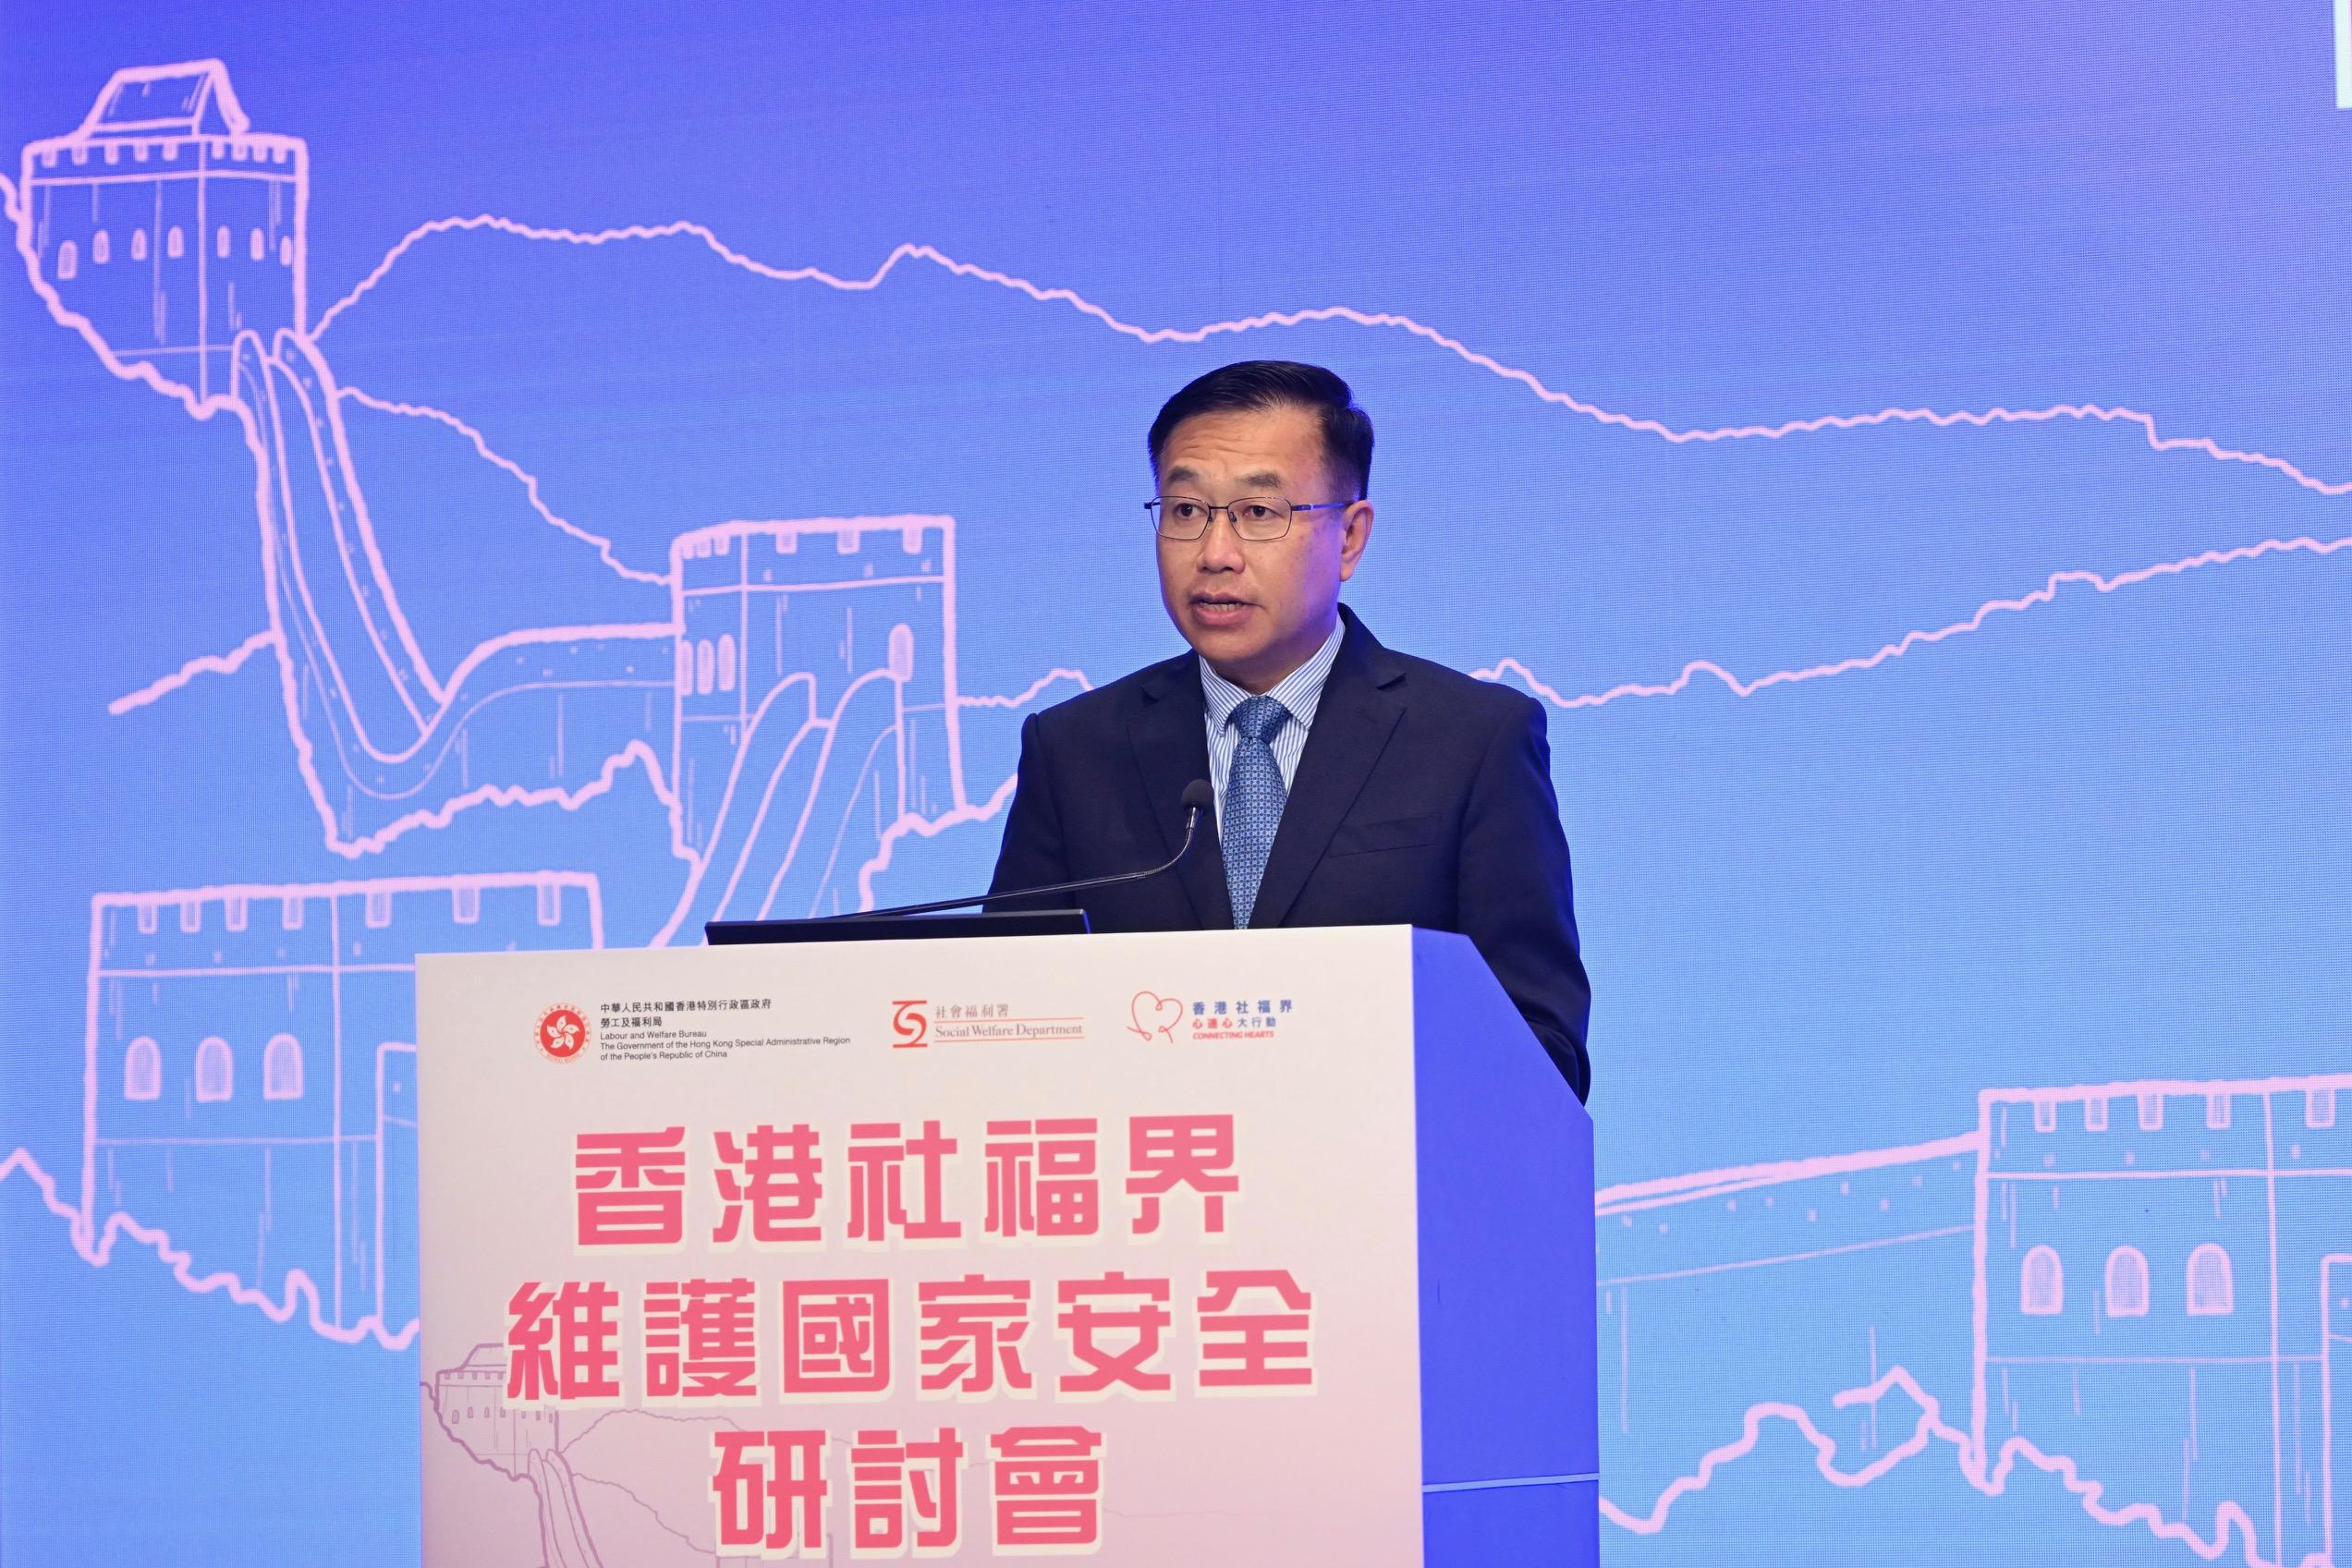 The symposium on safeguarding national security for the social welfare sector of Hong Kong, jointly organised by the Labour and Welfare Bureau and the Social Welfare Department of the Government of the Hong Kong Special Administrative Region (HKSAR) and the Connecting Hearts Limited, was held today (April 8). Photo shows Deputy Director of the Liaison Office of the Central People’s Government in the HKSAR Mr He Jing addressing the symposium.